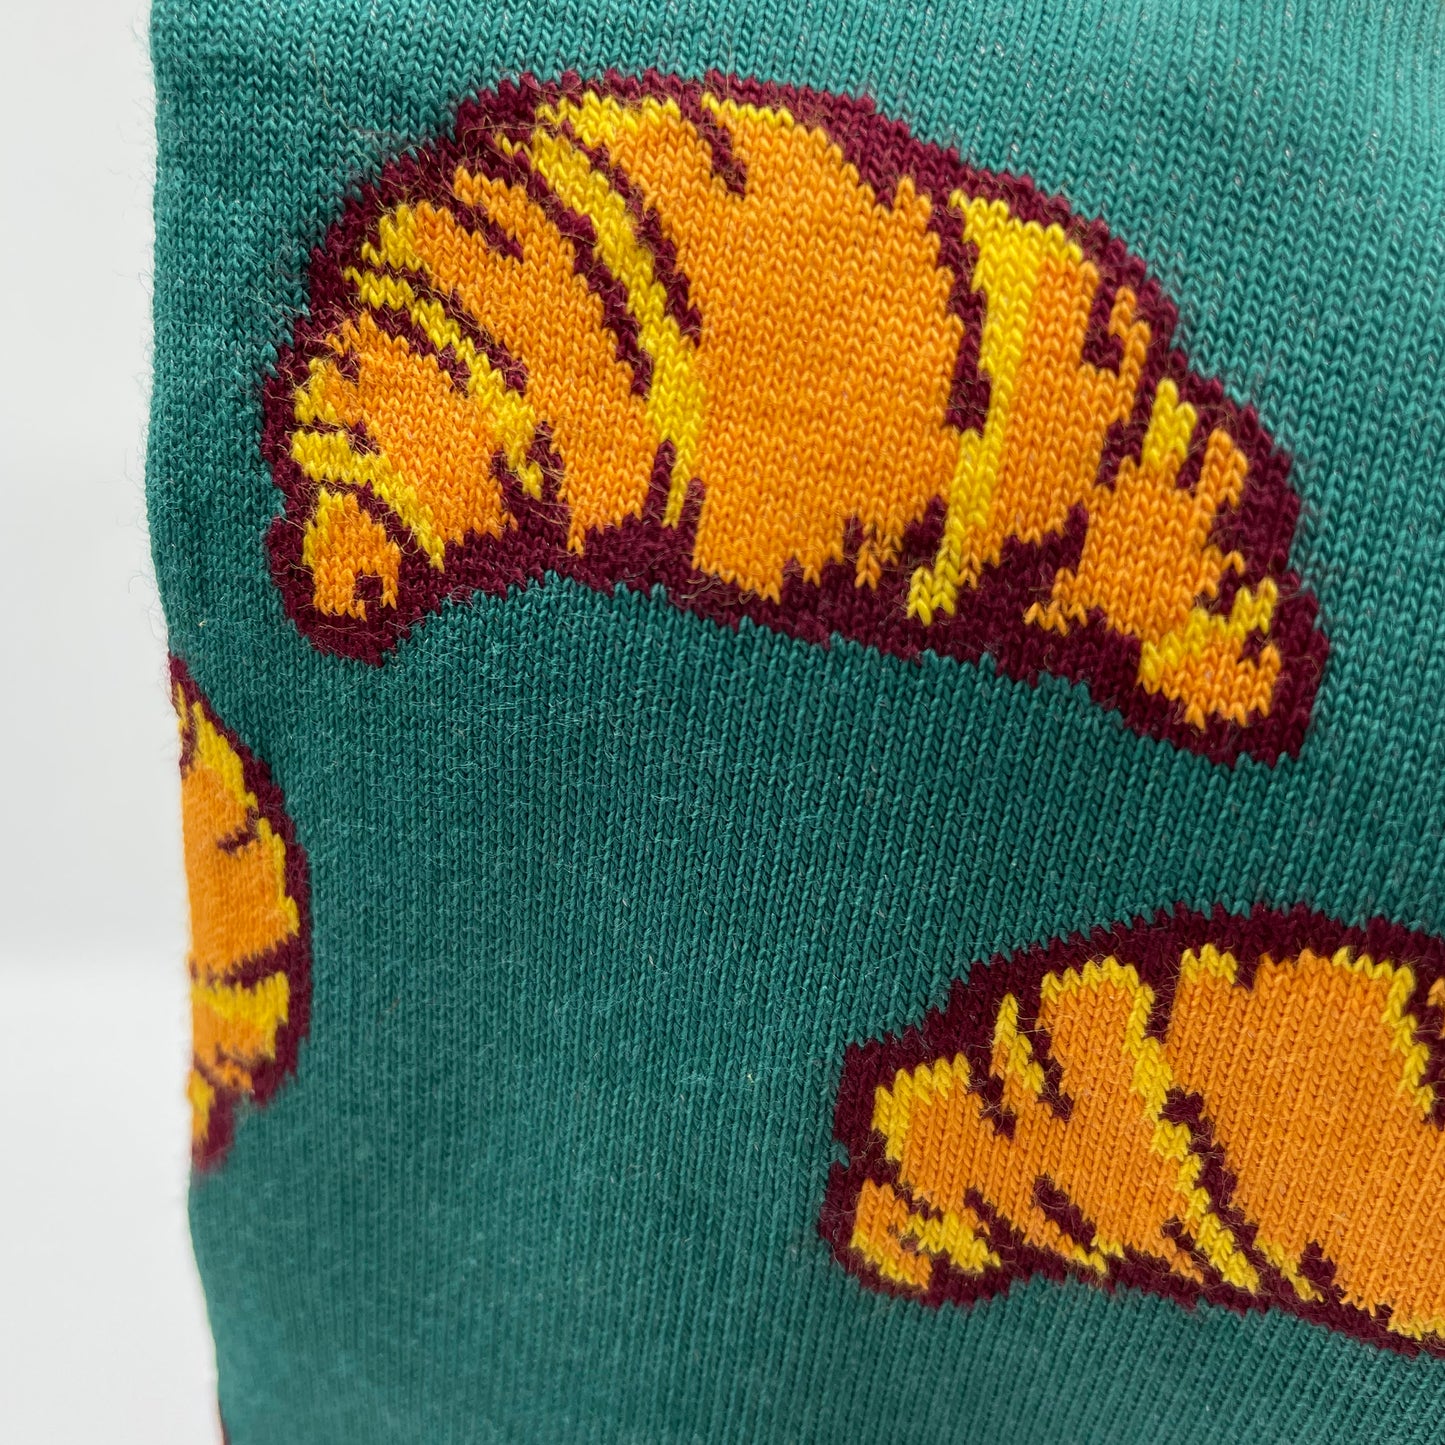 A close-up photo shows a croissant pattern woven into teal organic cotton socks.